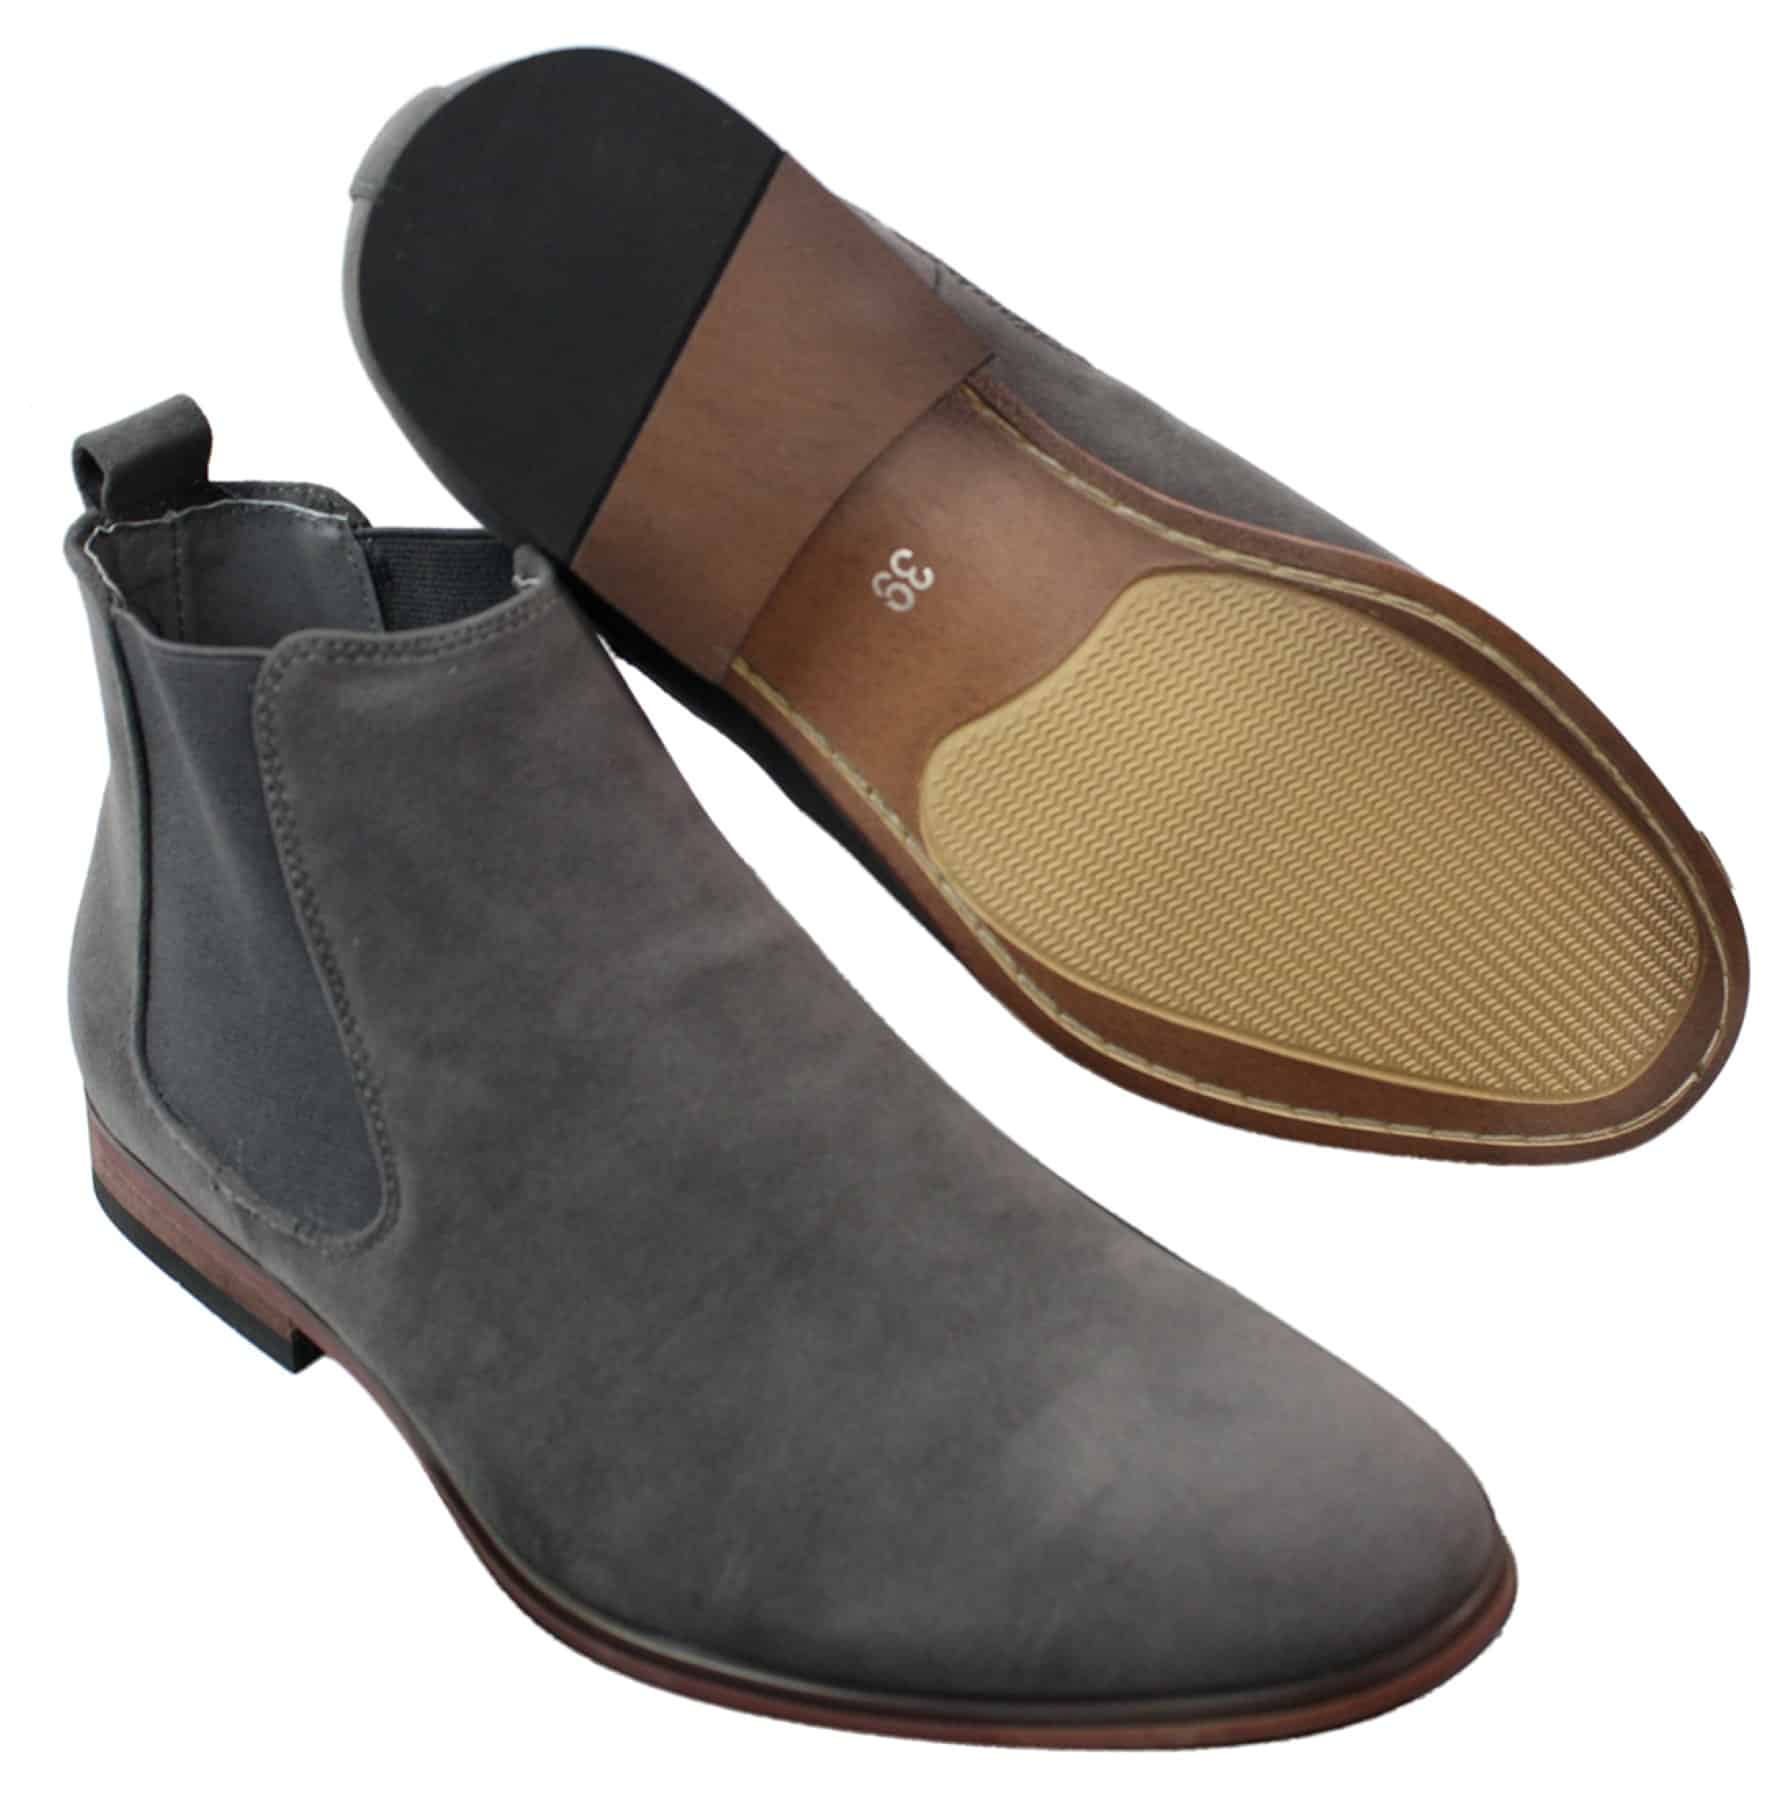 GALAX Mens Italian Suede Chelsea Ankle Boots Smart Casual Desert Dealer Slip On